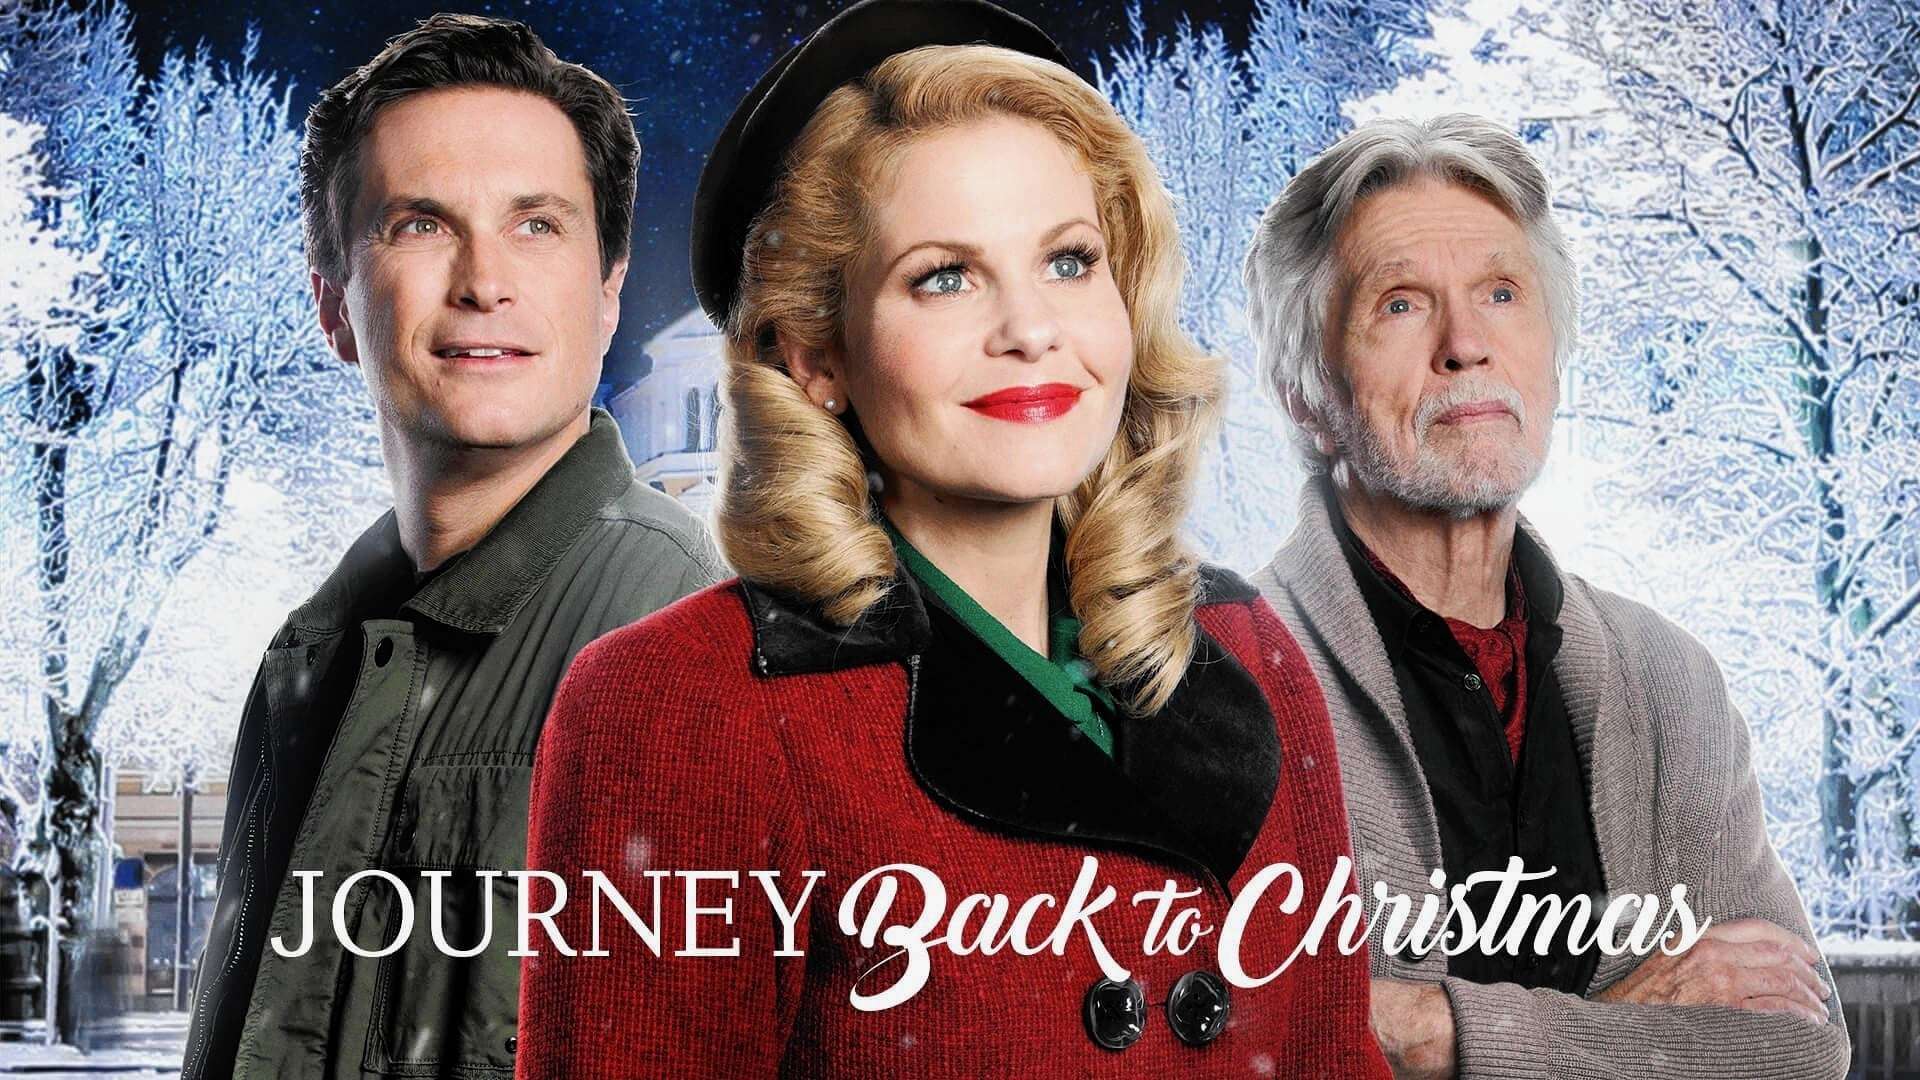 the journey back to christmas